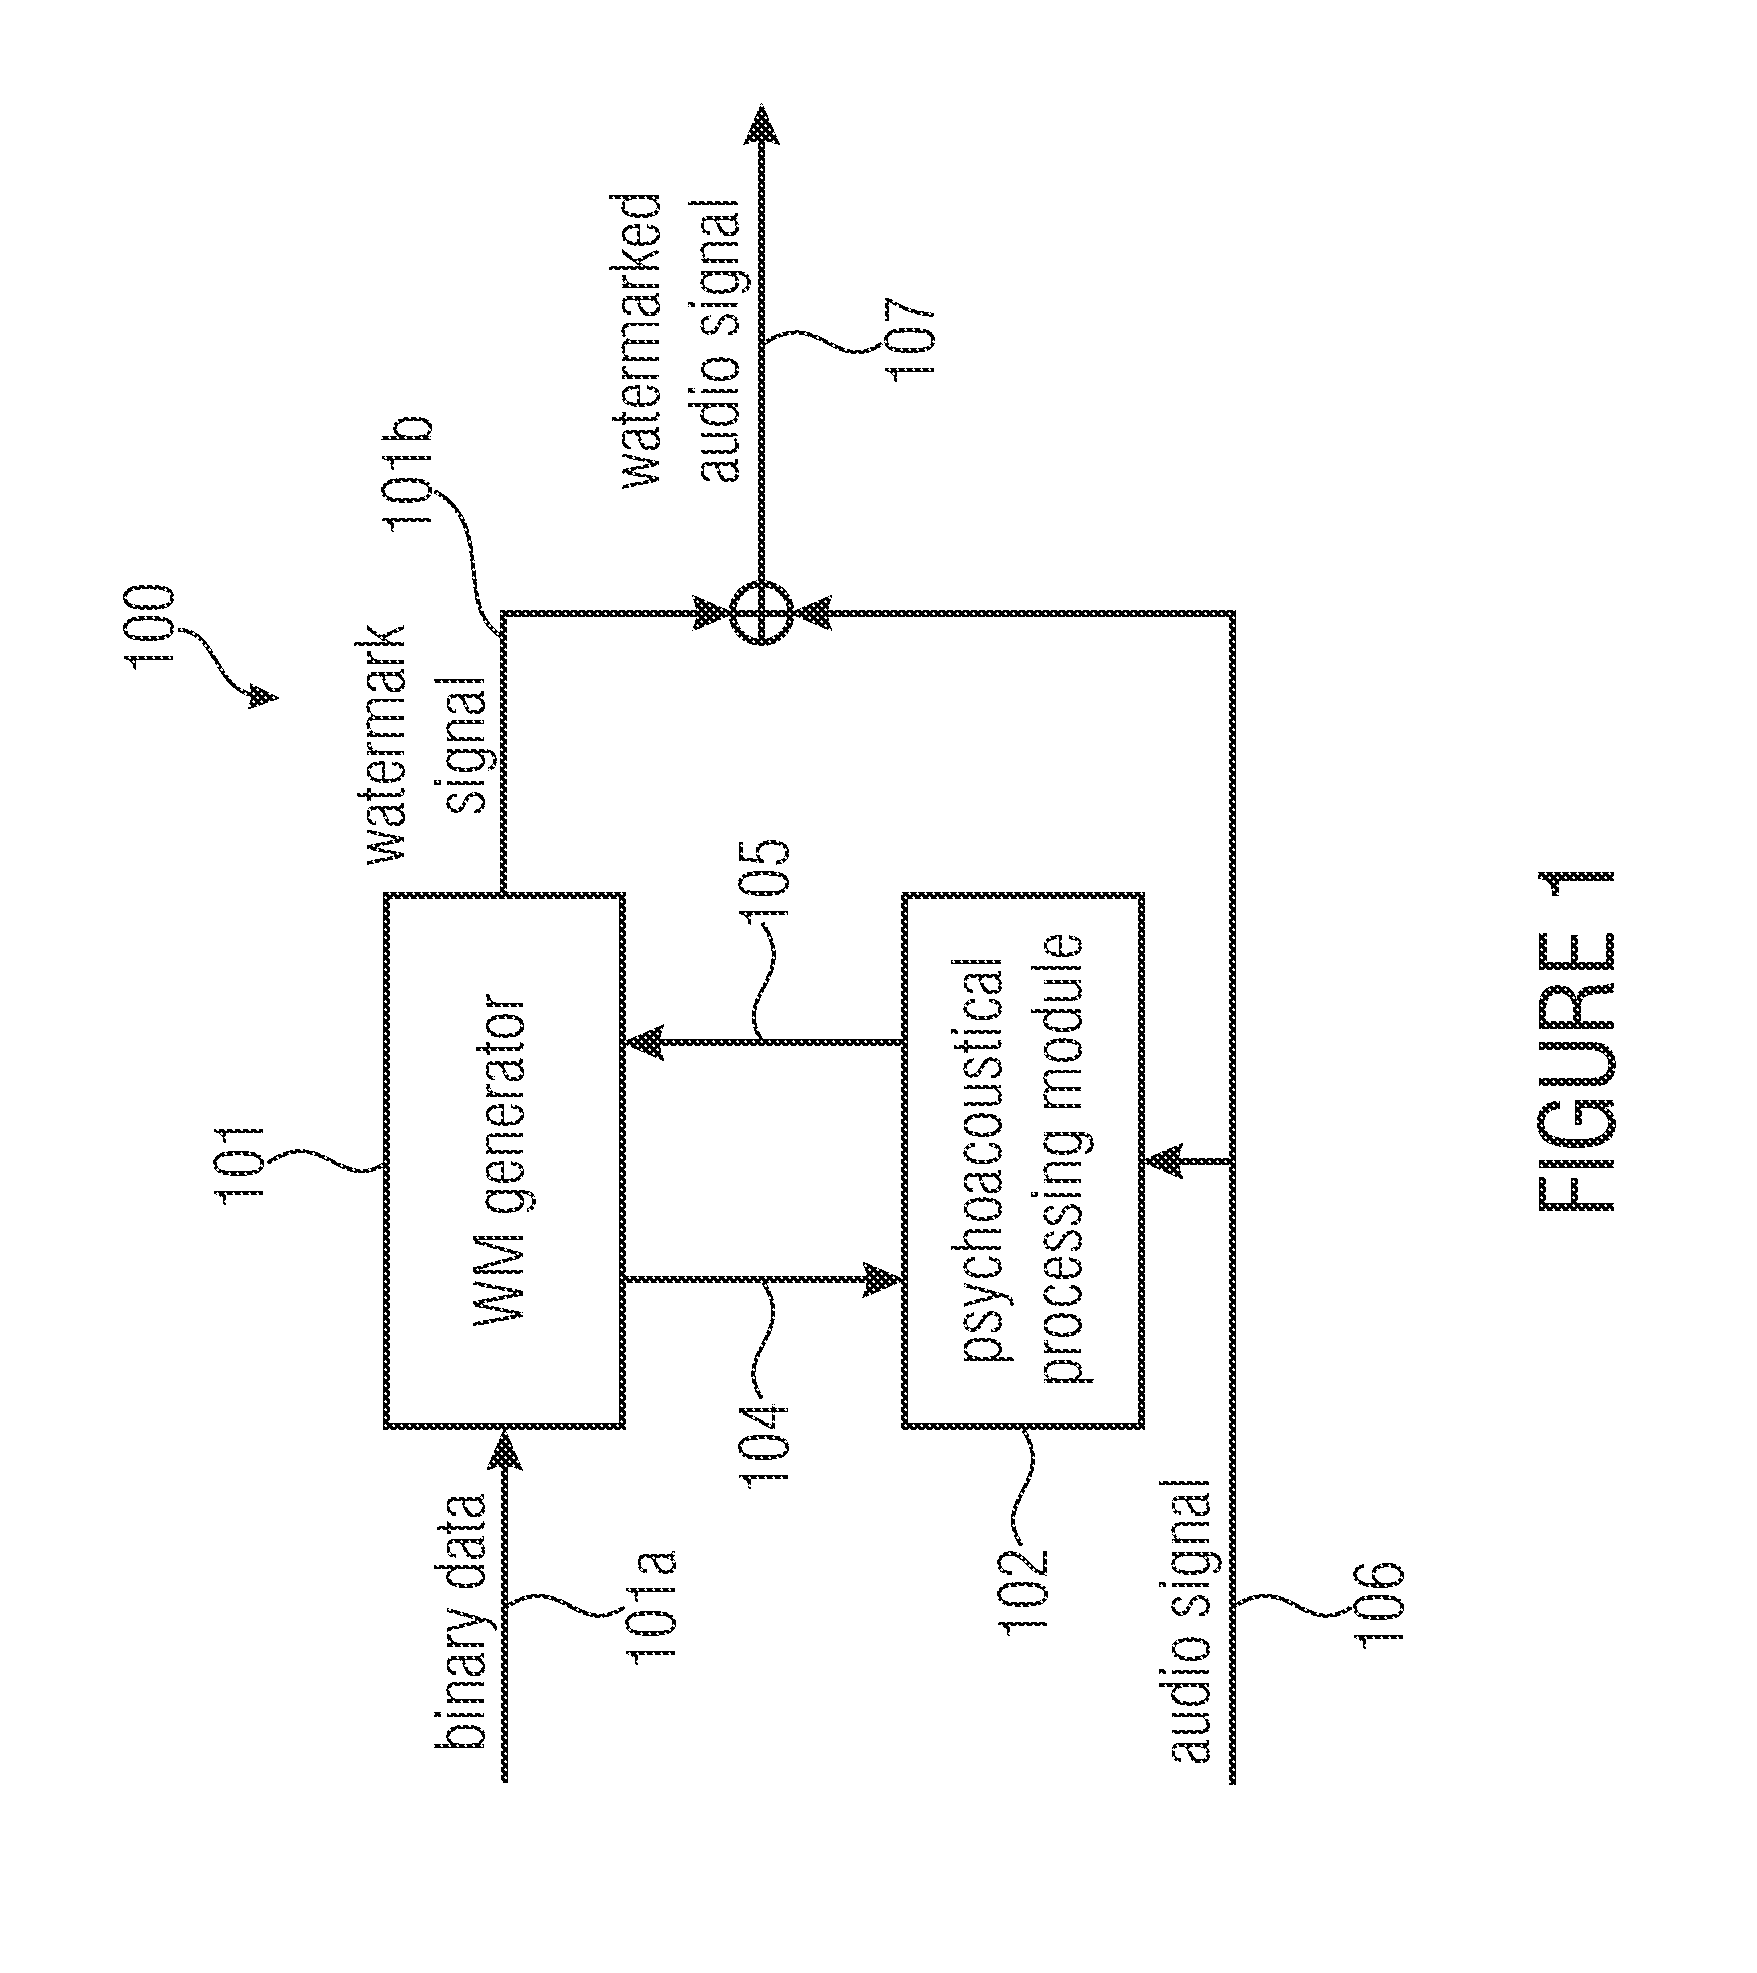 Watermark signal provider and method for providing a watermark signal